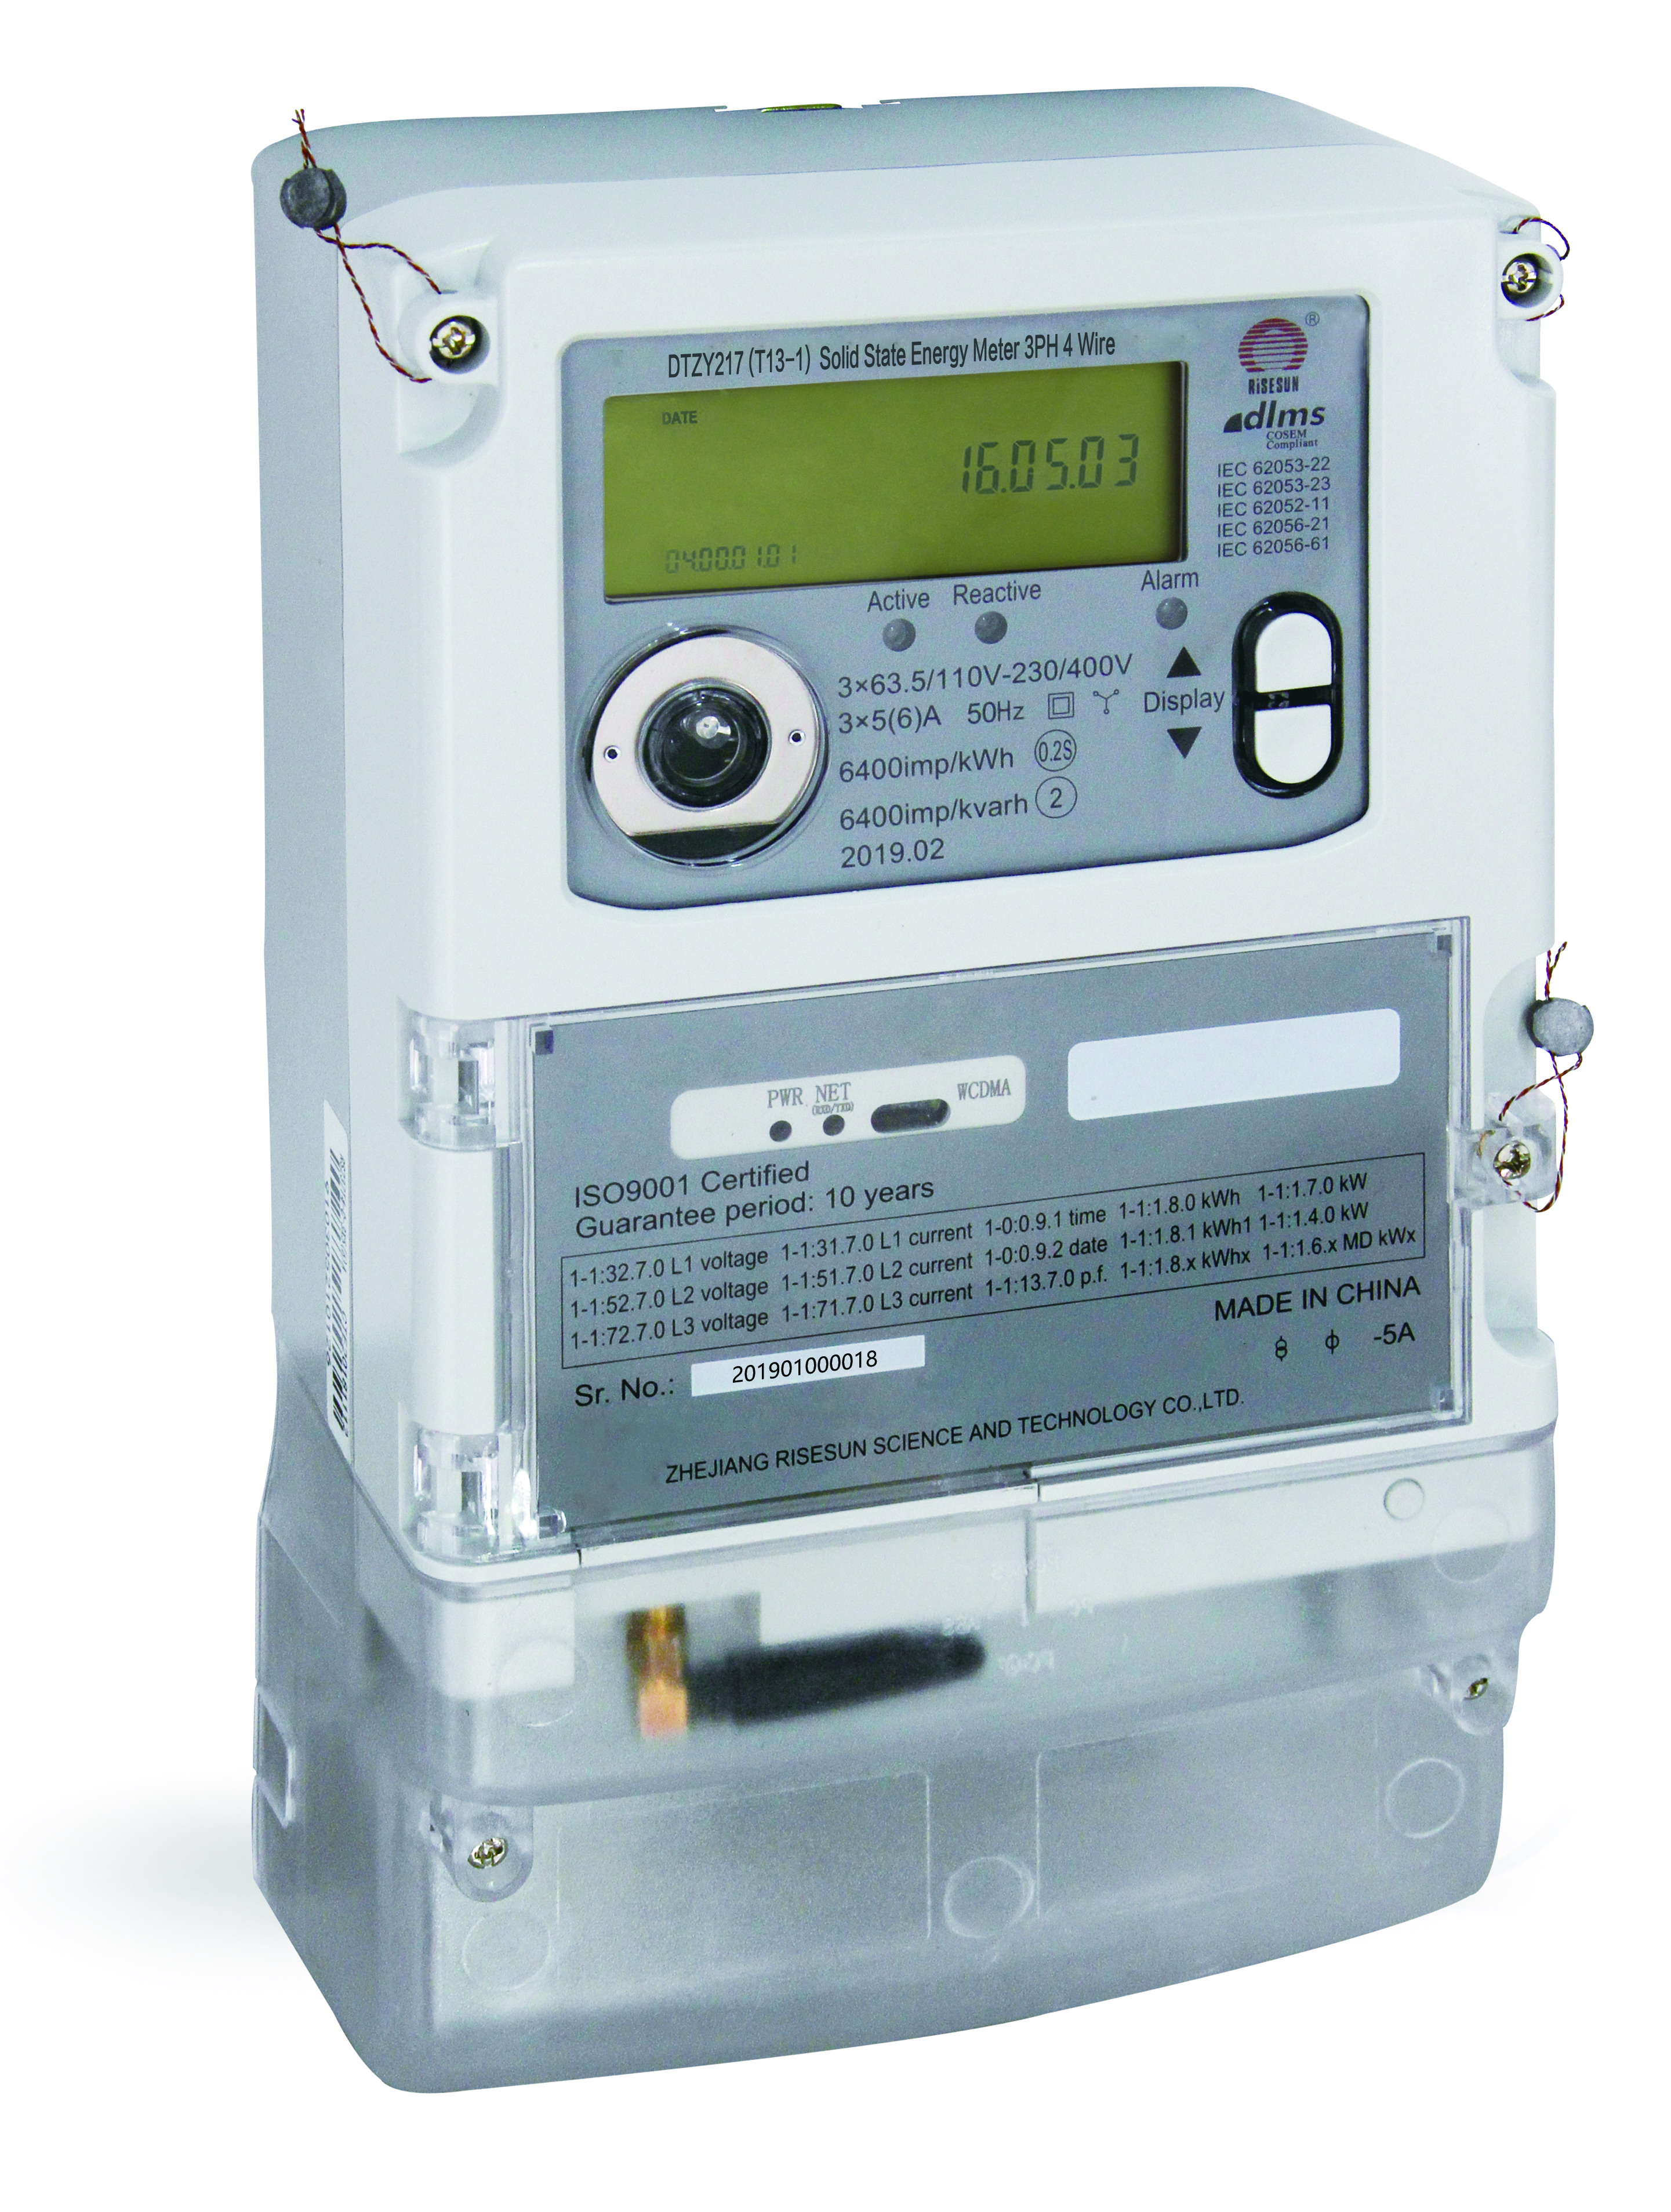 DTZY217 ( T13-1 ) Three Phase Smart Meter with Communication as per DLMS